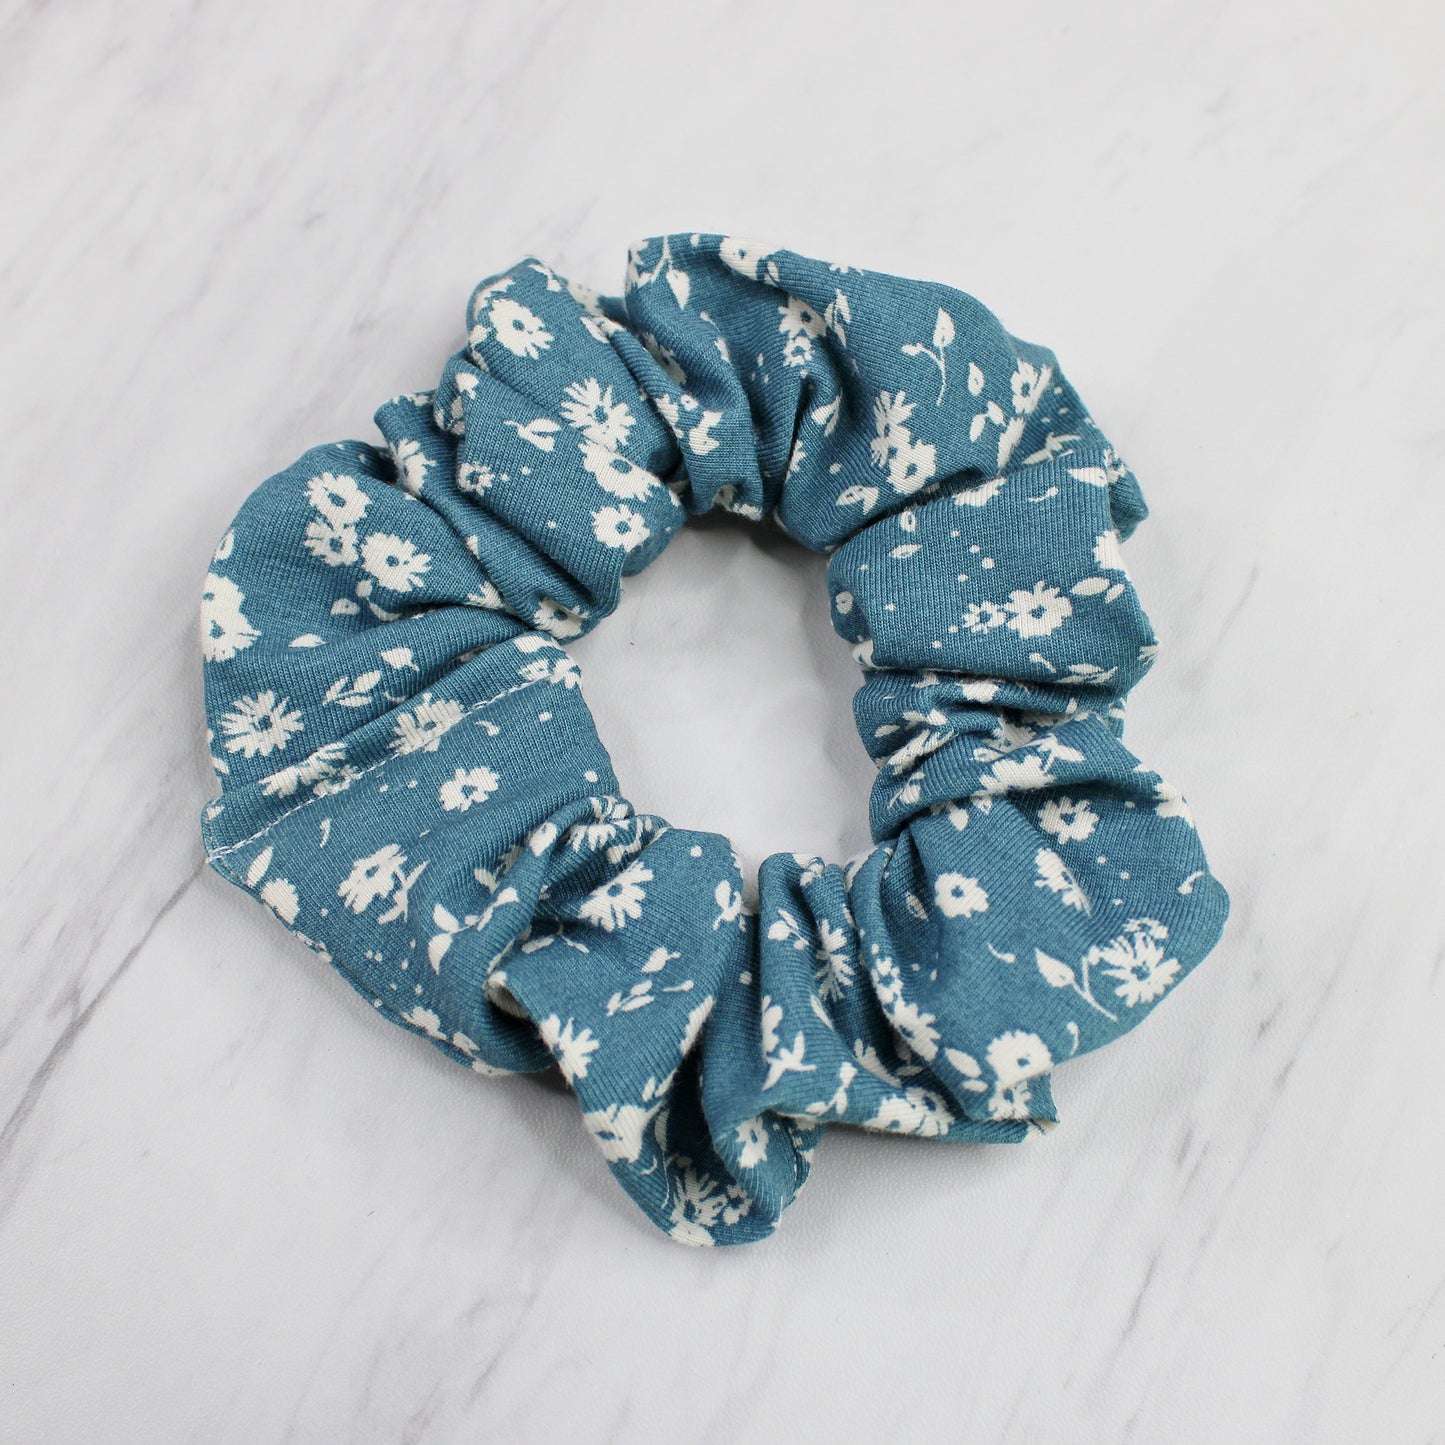 Cozy Fall Small Floral Hair Tie Set, Orange, Teal and White